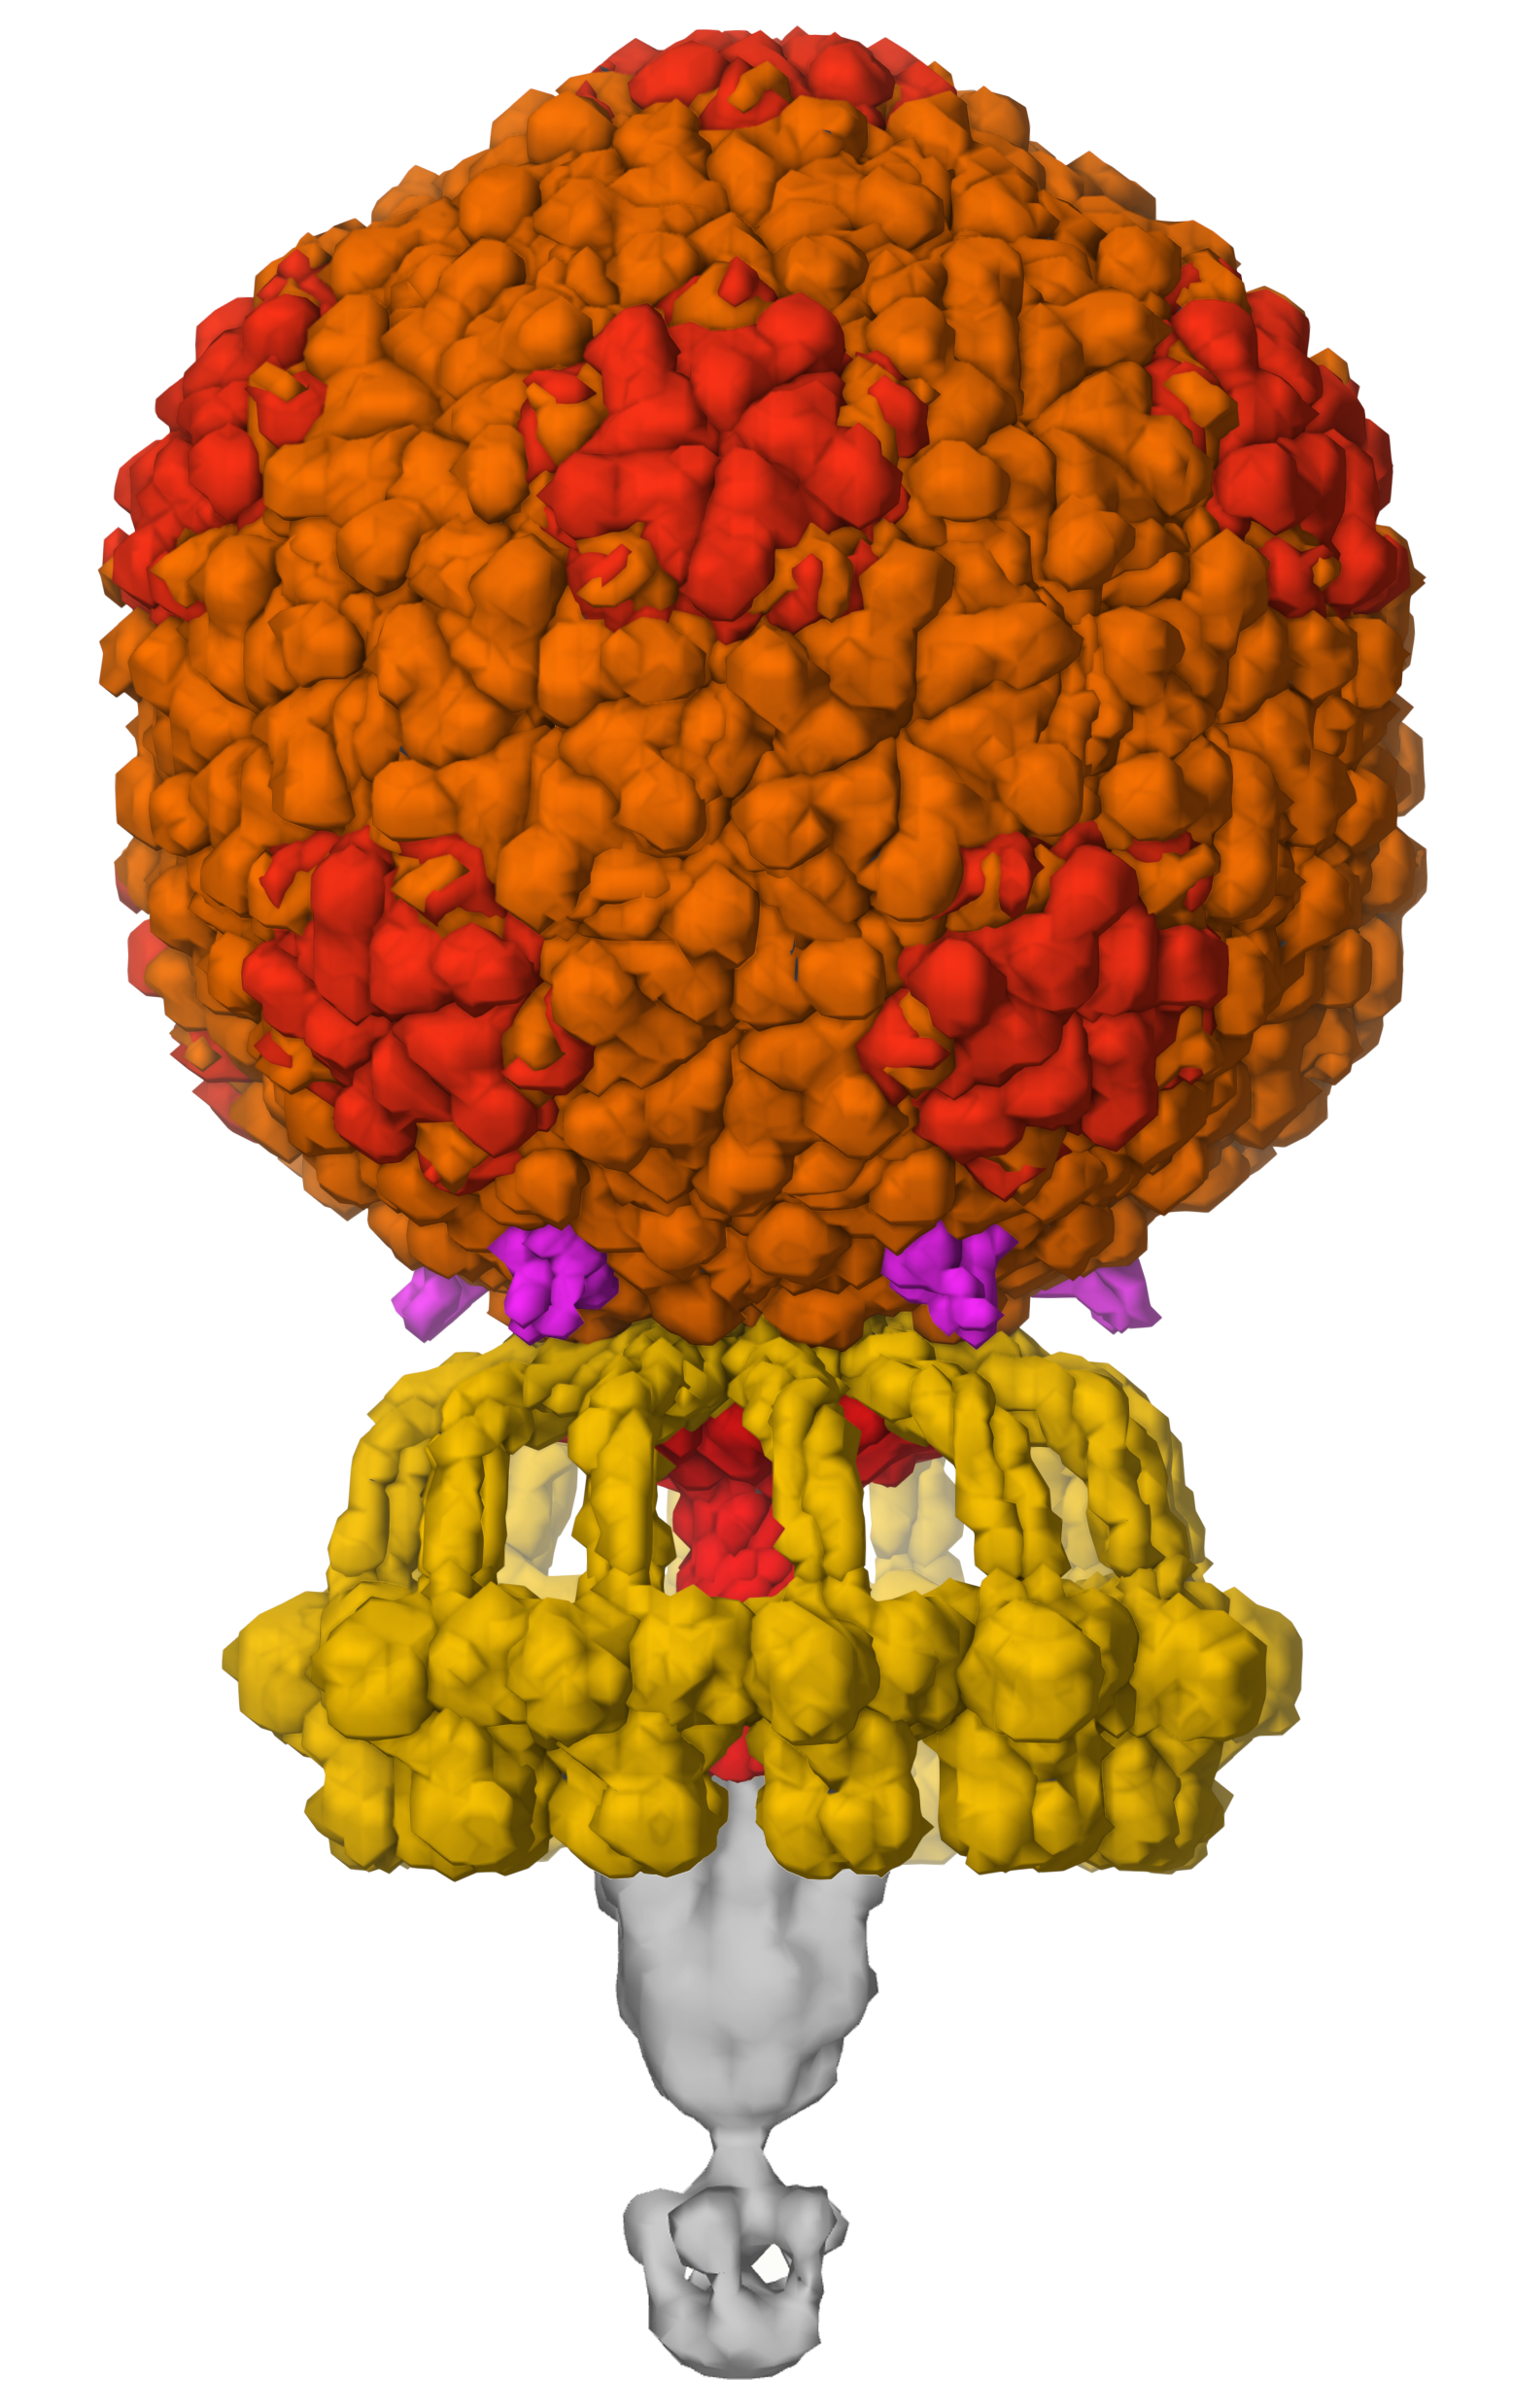  Most viruses protect and deliver their genomes in symmetrical capsid